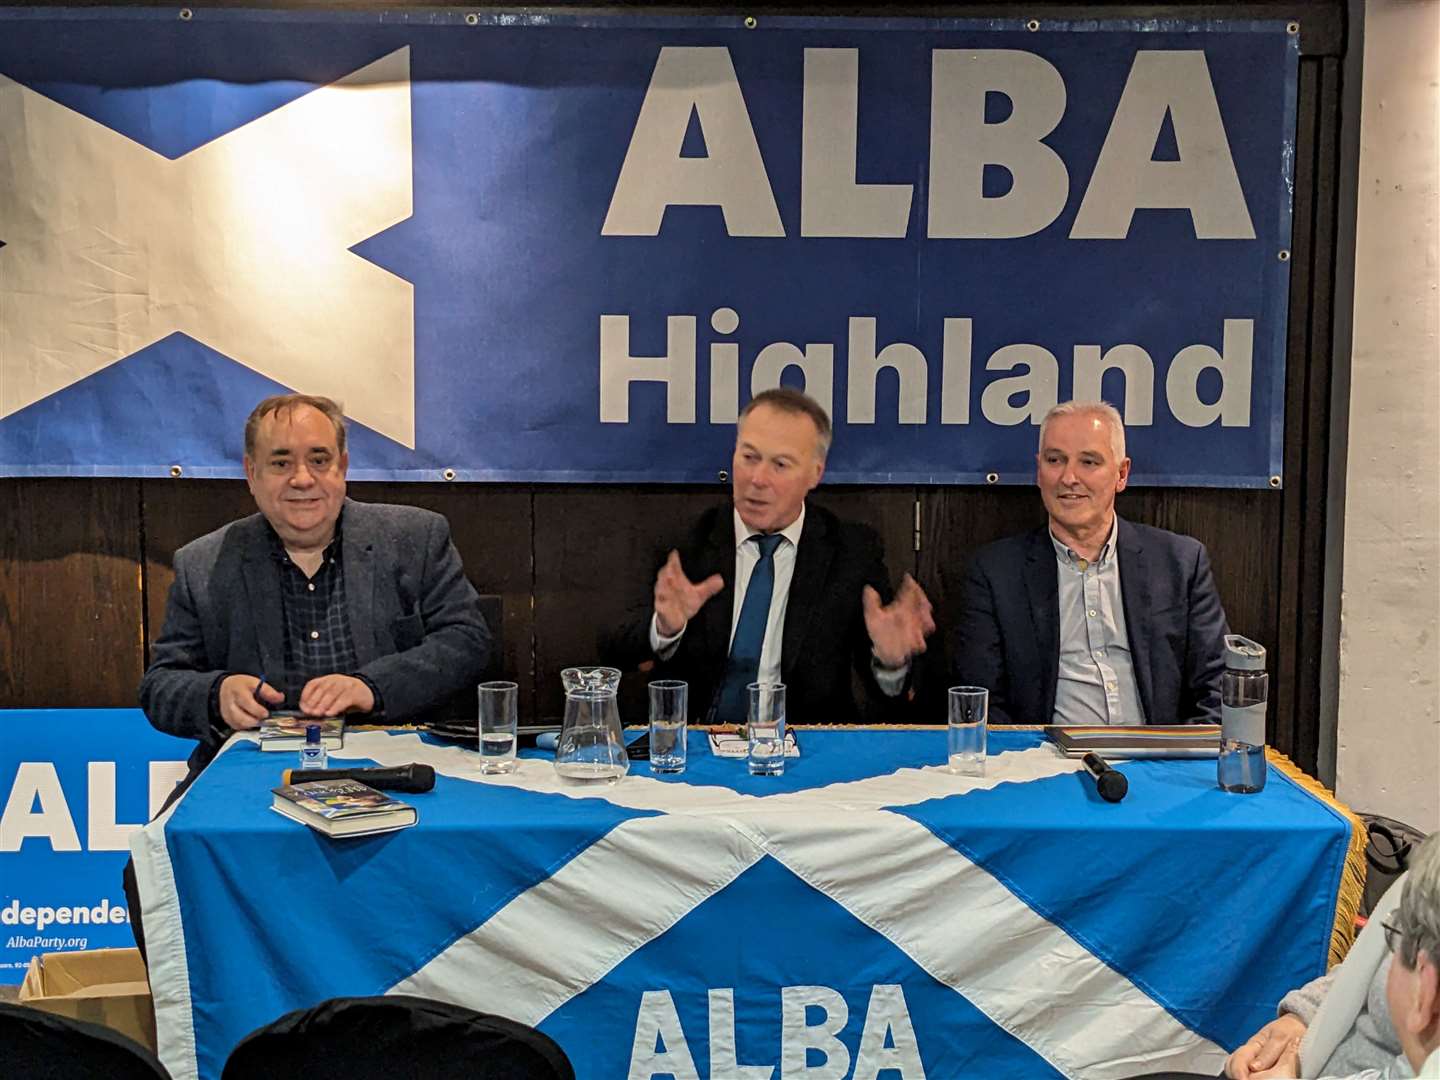 From left: Alex Salmond, Jimmy Duncan, Karl Rosie at the Alba Party event in Inverness.